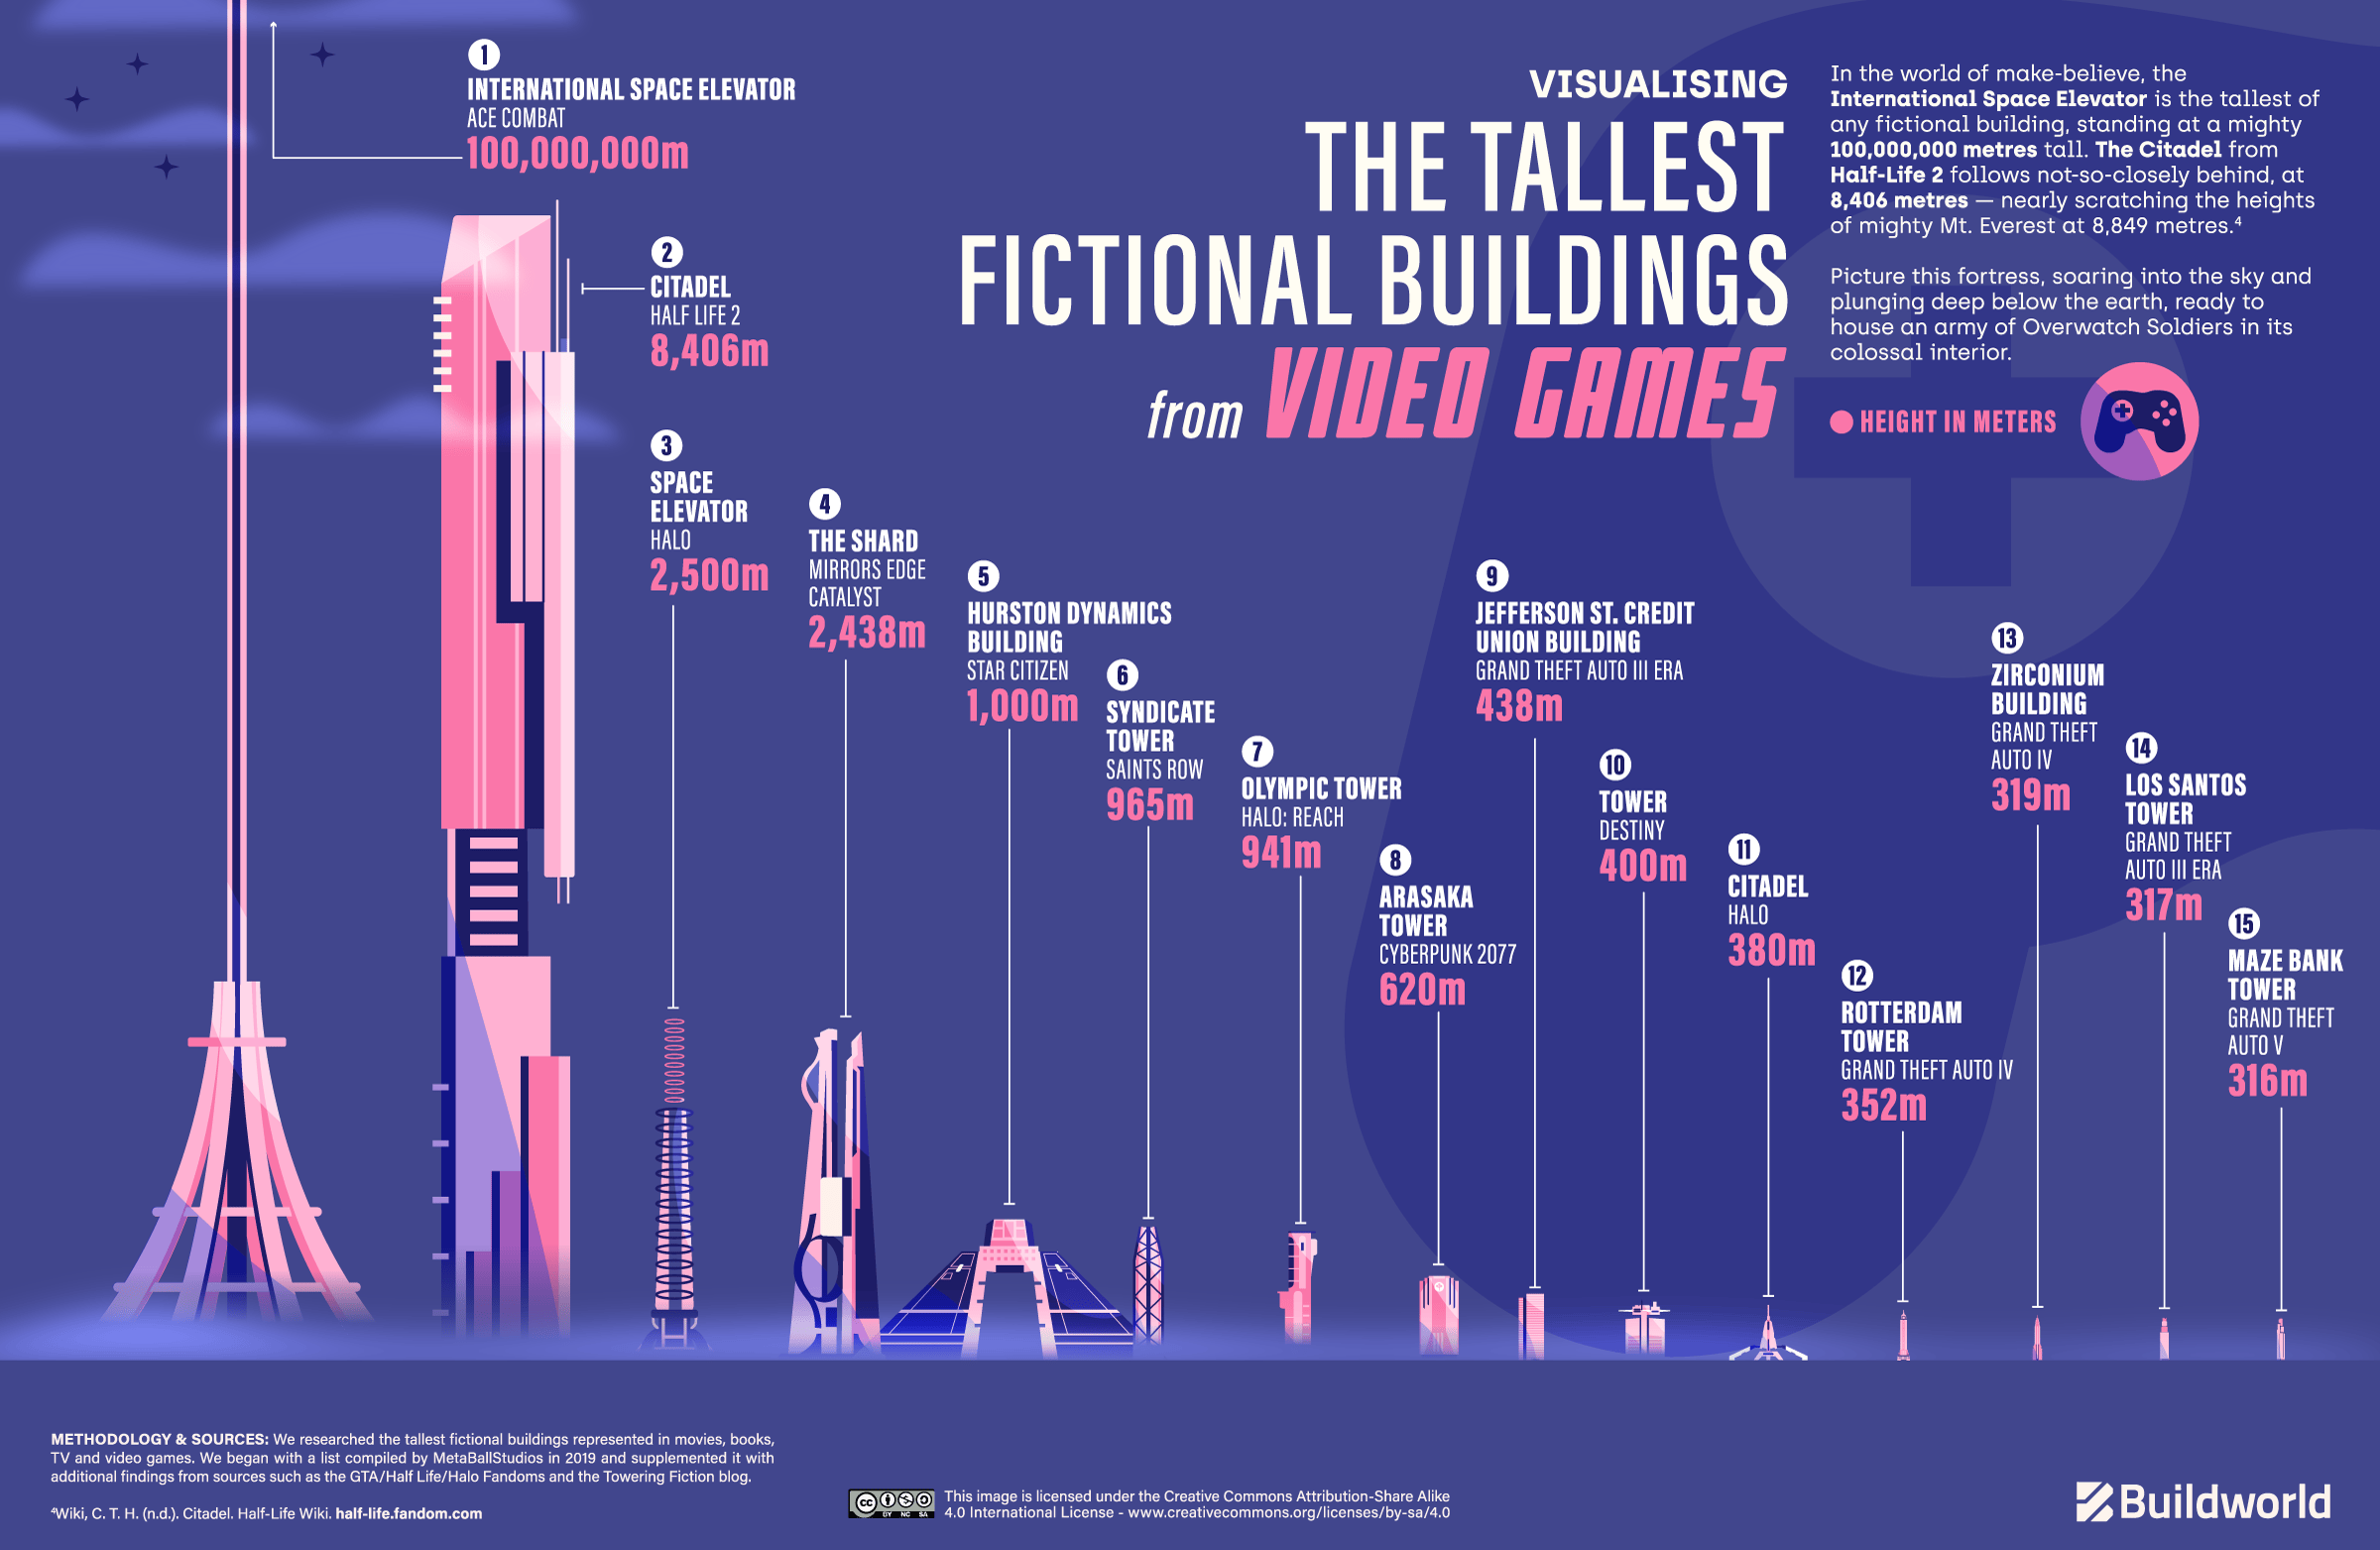 The tallest fictional buildings in video games visualised